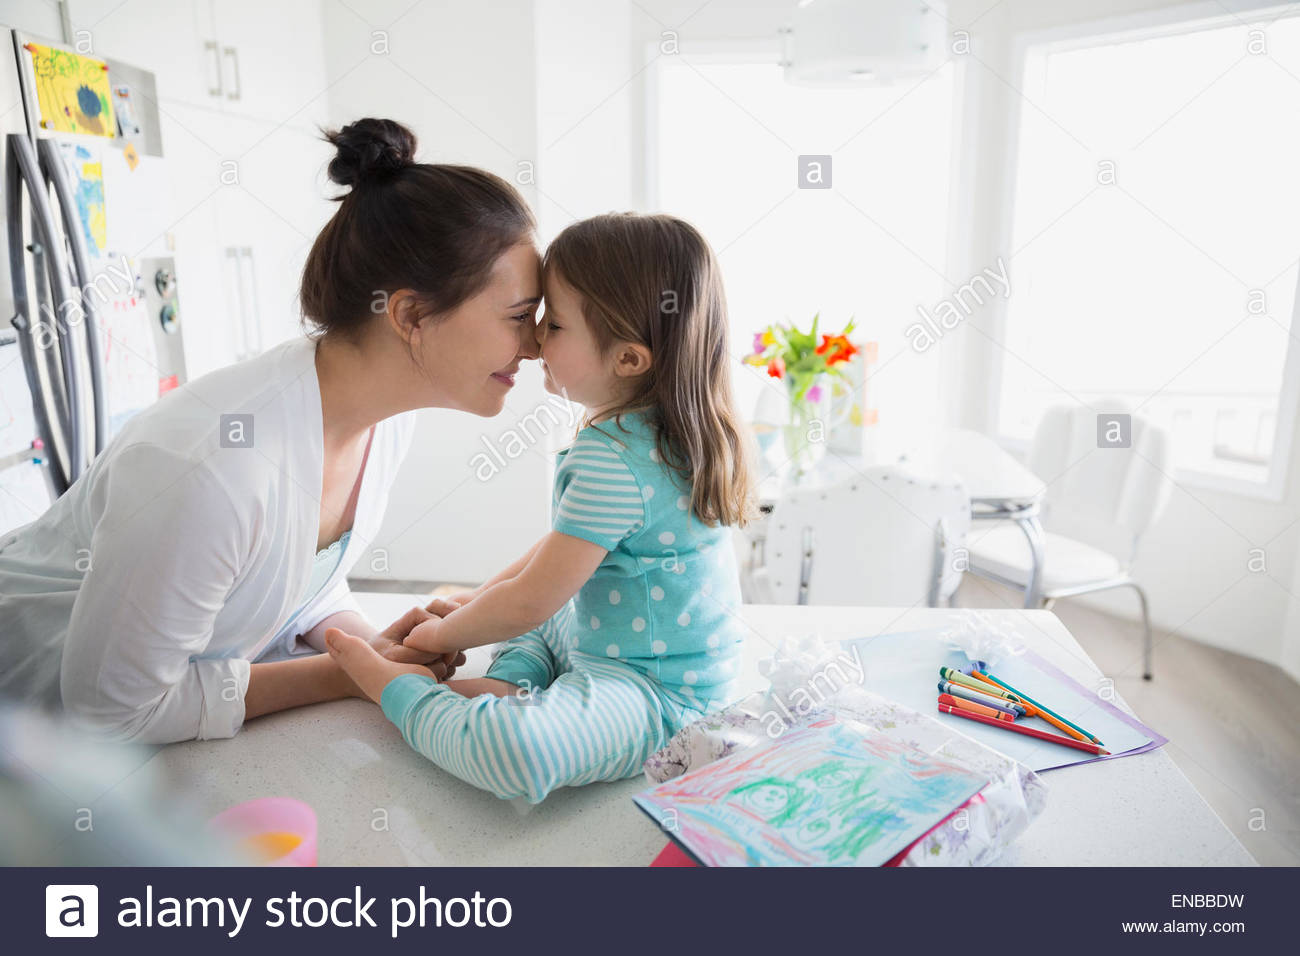 Affectionate mother and daughter rubbing noses in pajamas Stock Photo